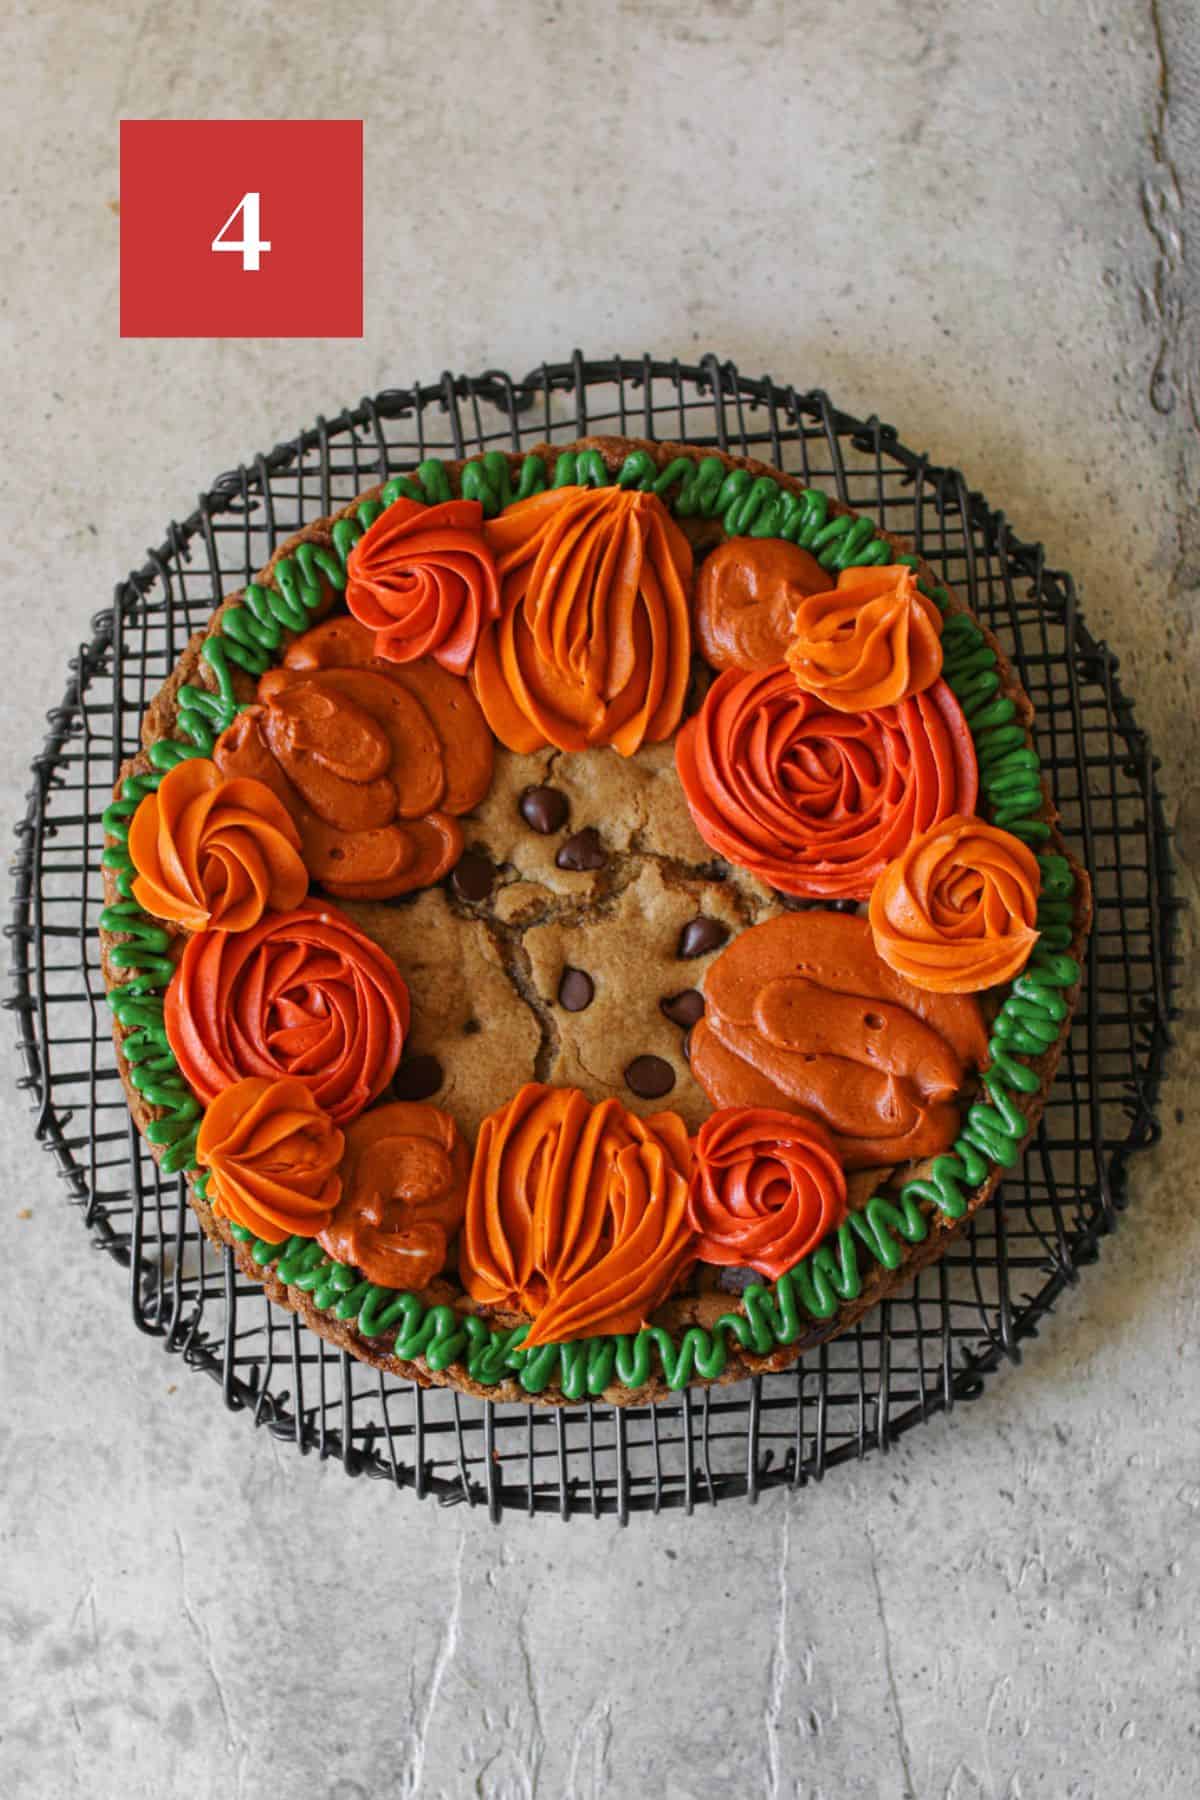 Fall cookie cake with a thin green wavy border and different shades of orange in different sized circles around the edge of the cookie cake. The cookie cake sits on a black wire trivet on a stone background. In the upper left corner is a dark red square with a white '4' in the center.